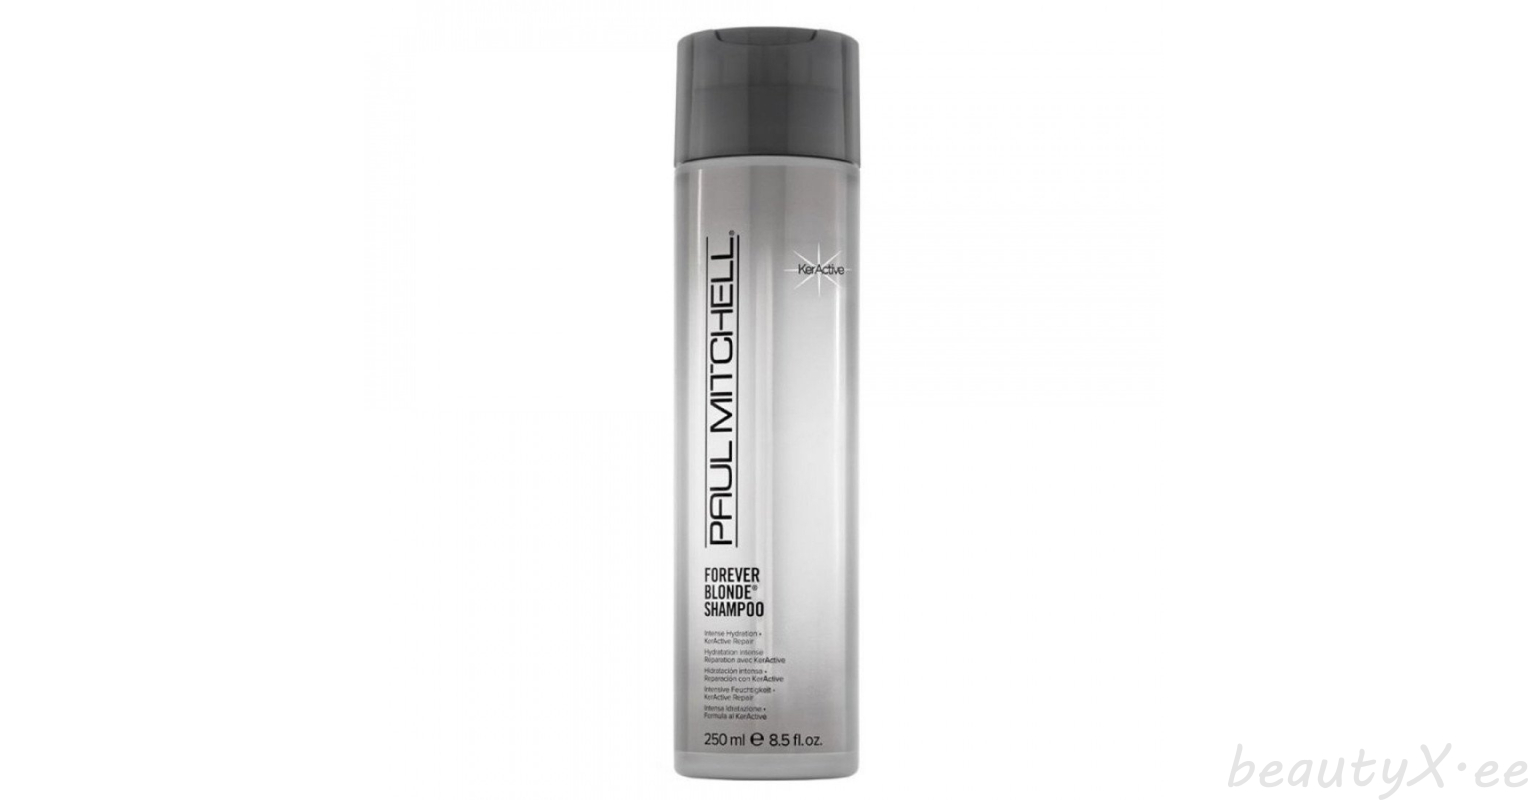 4. Paul Mitchell Forever Blonde Shampoo - wide 5